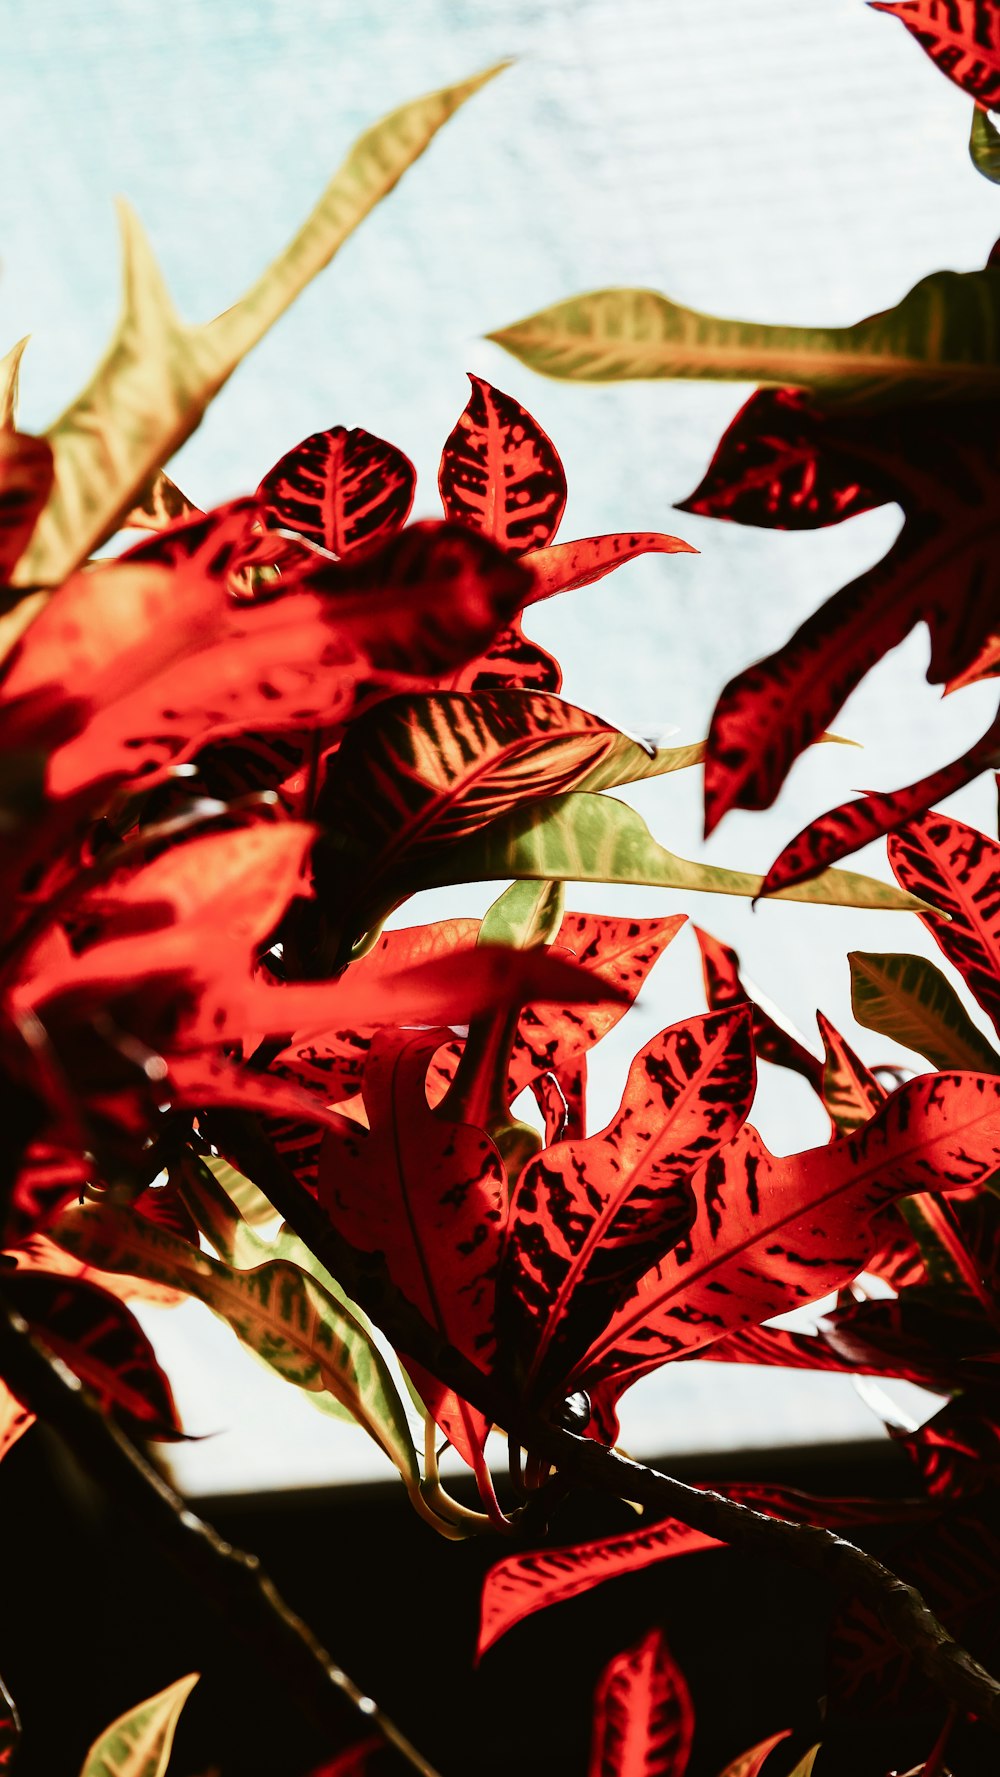 shallow focus photo of red plants